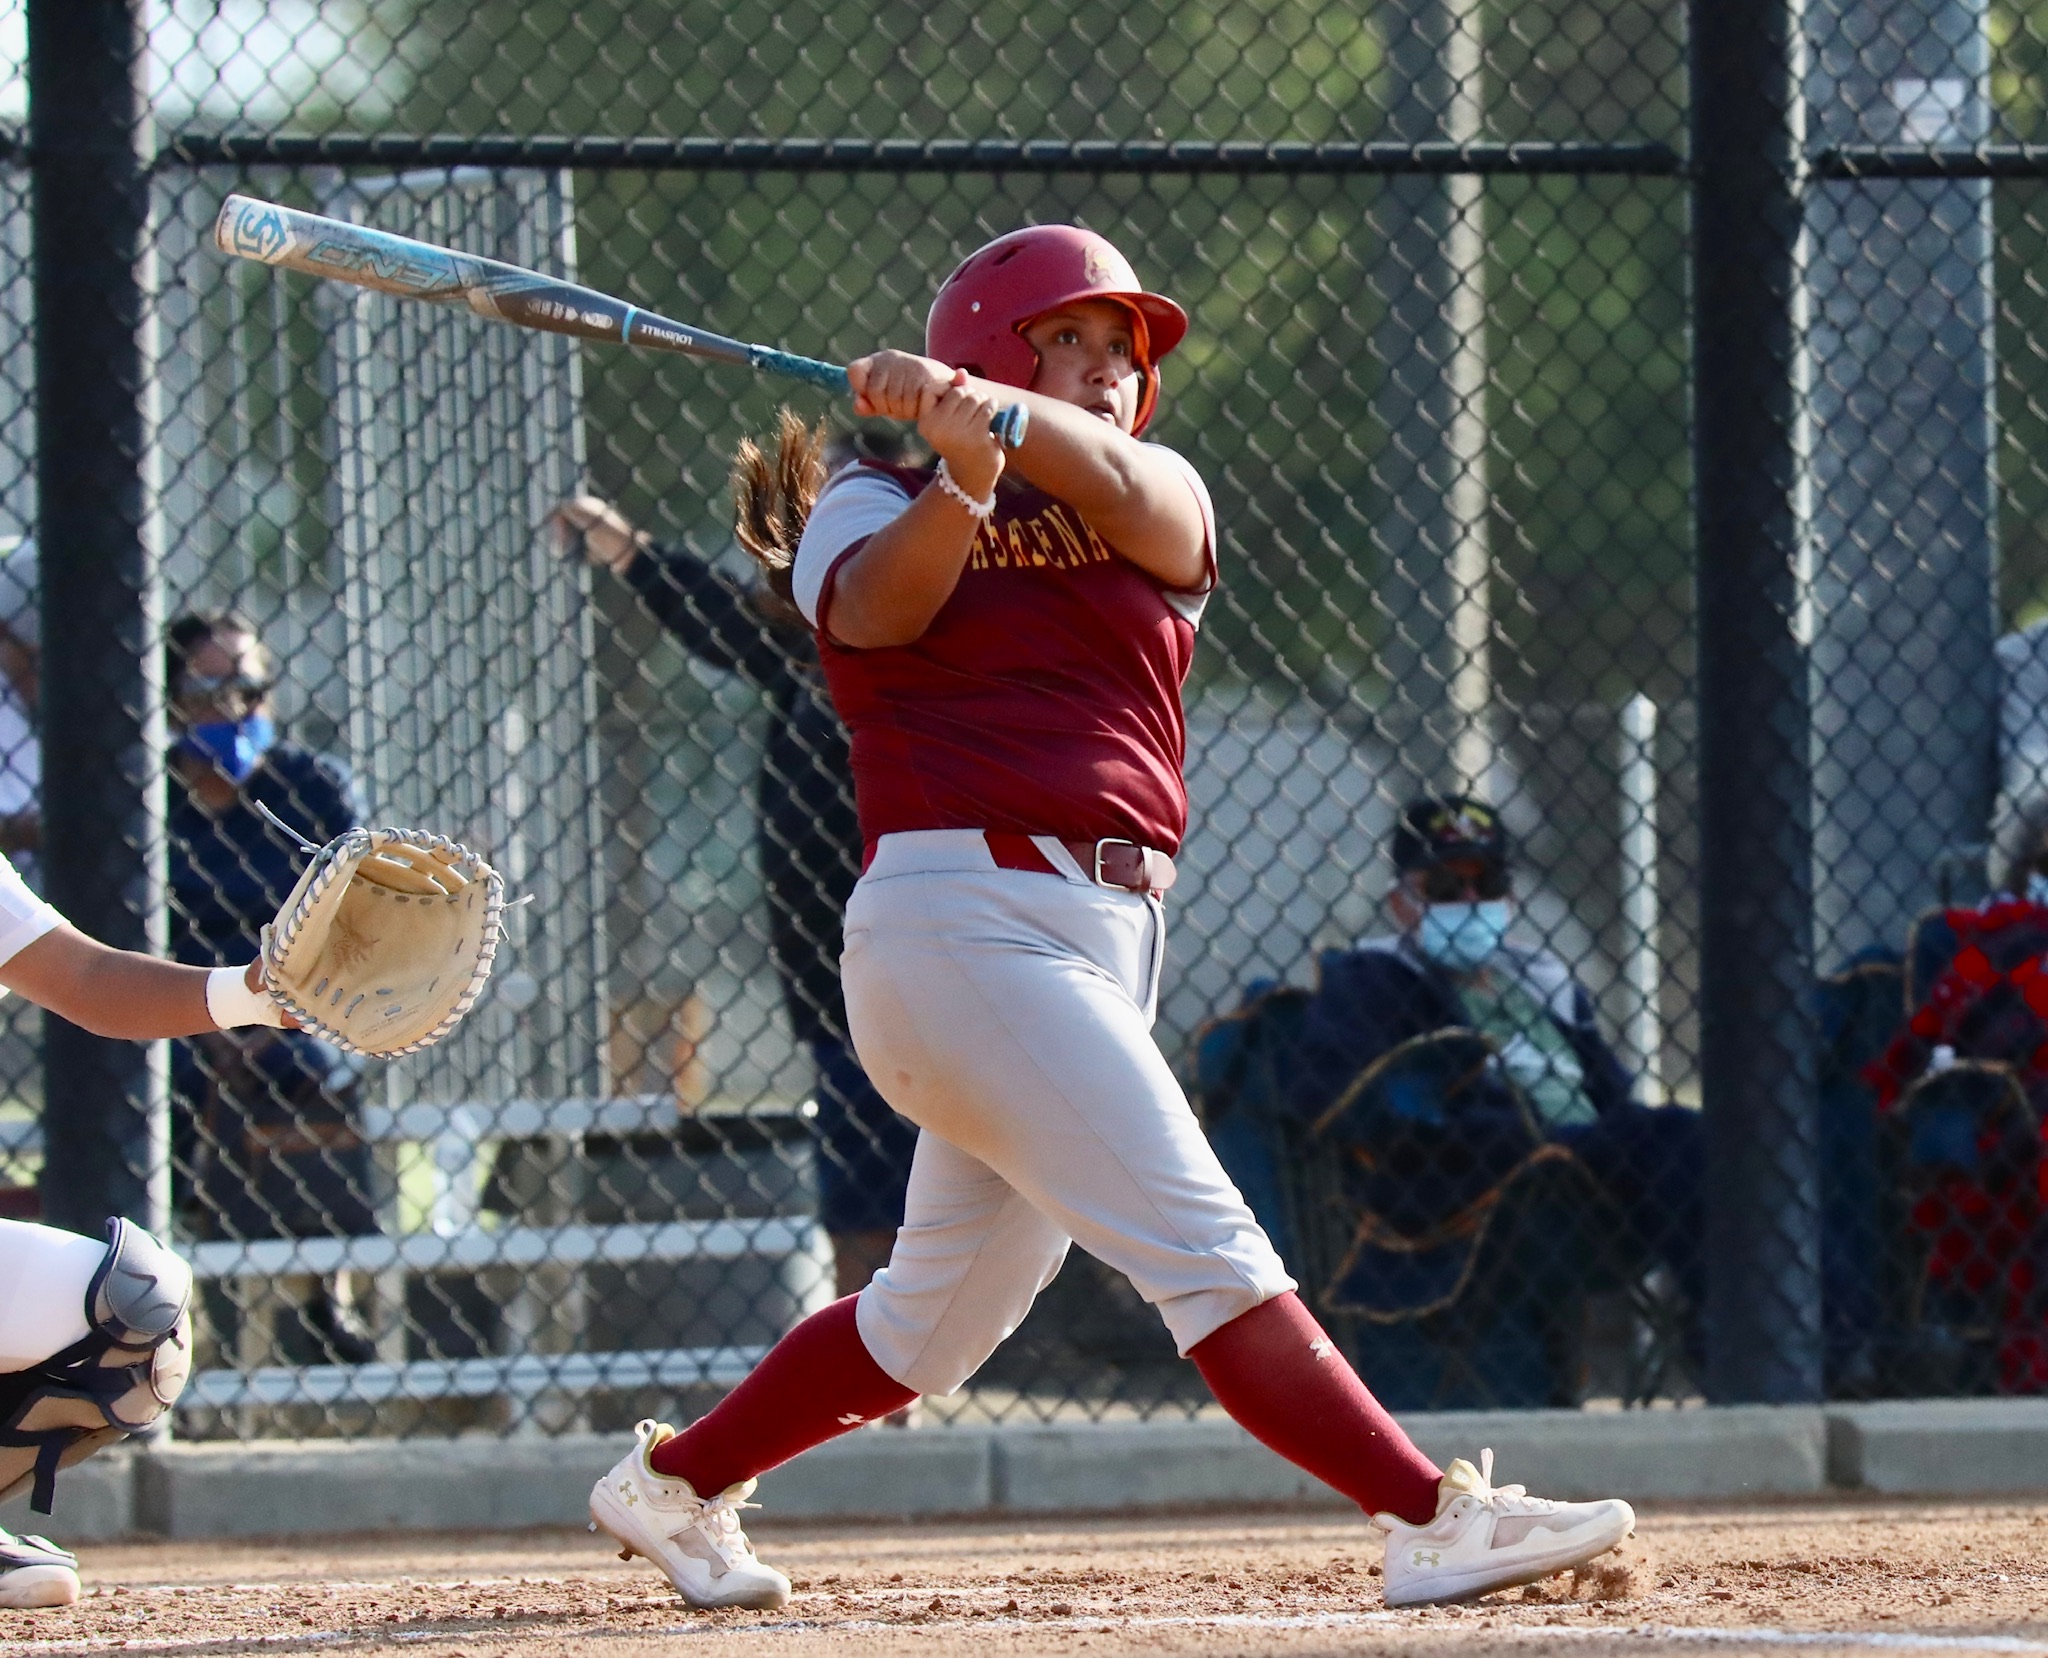 Vianey Orozco ripping a line drive in a recent game (photo by Michael Watkins, Athletics).